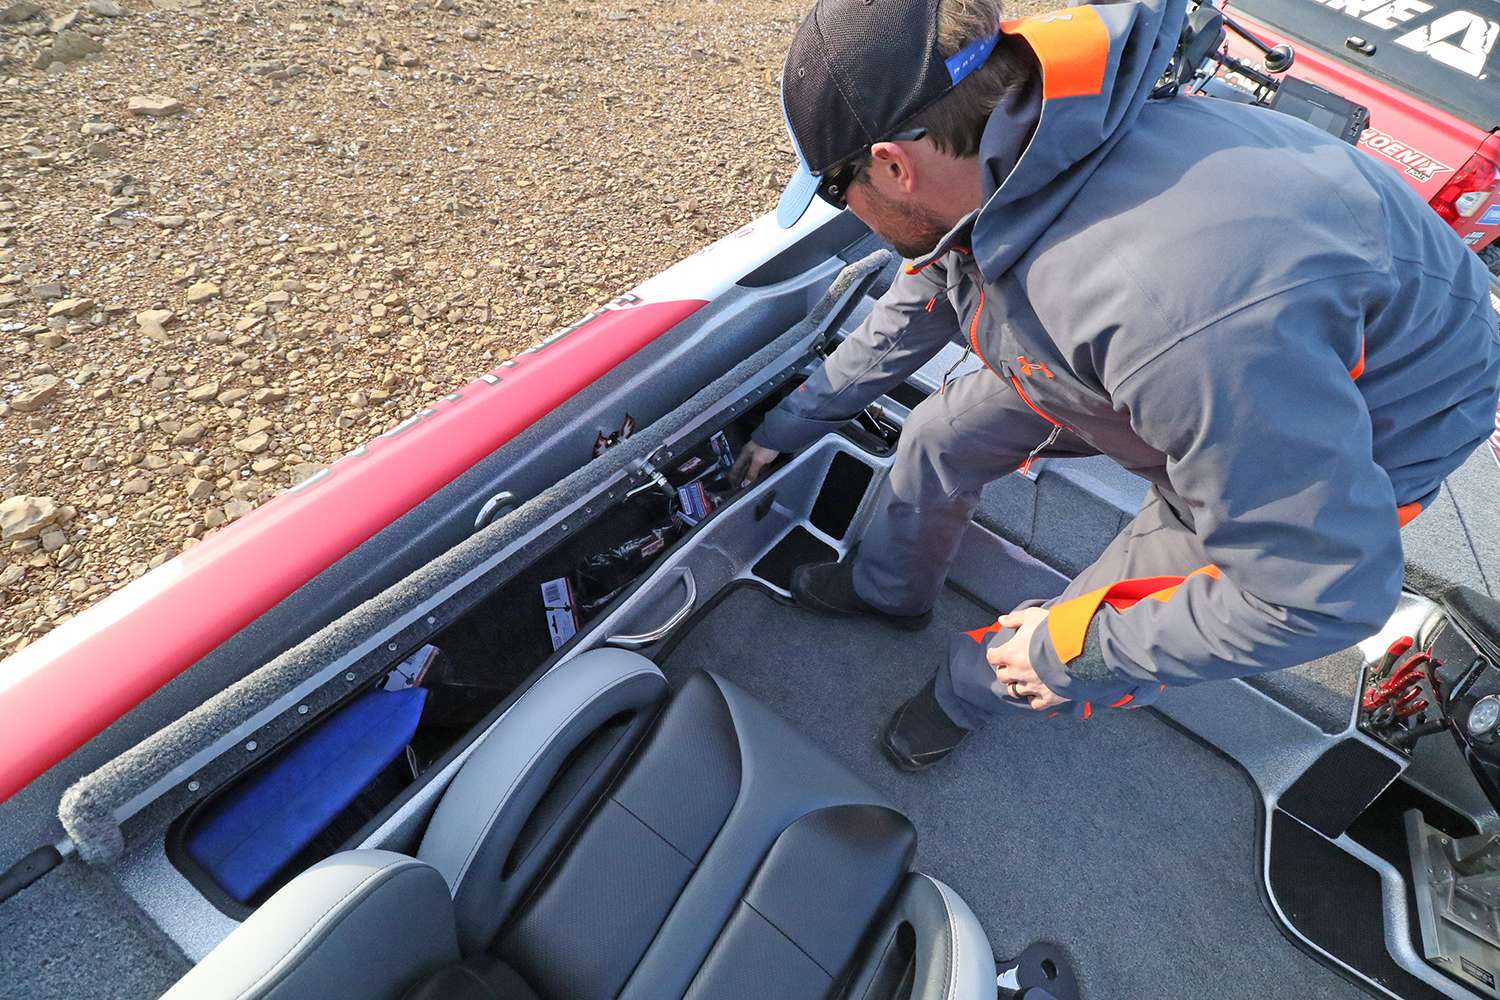 This storage compartment was likely designed for co-angler rods, but Lucas uses it for extra Rod Glove storage, and other odds and ends.